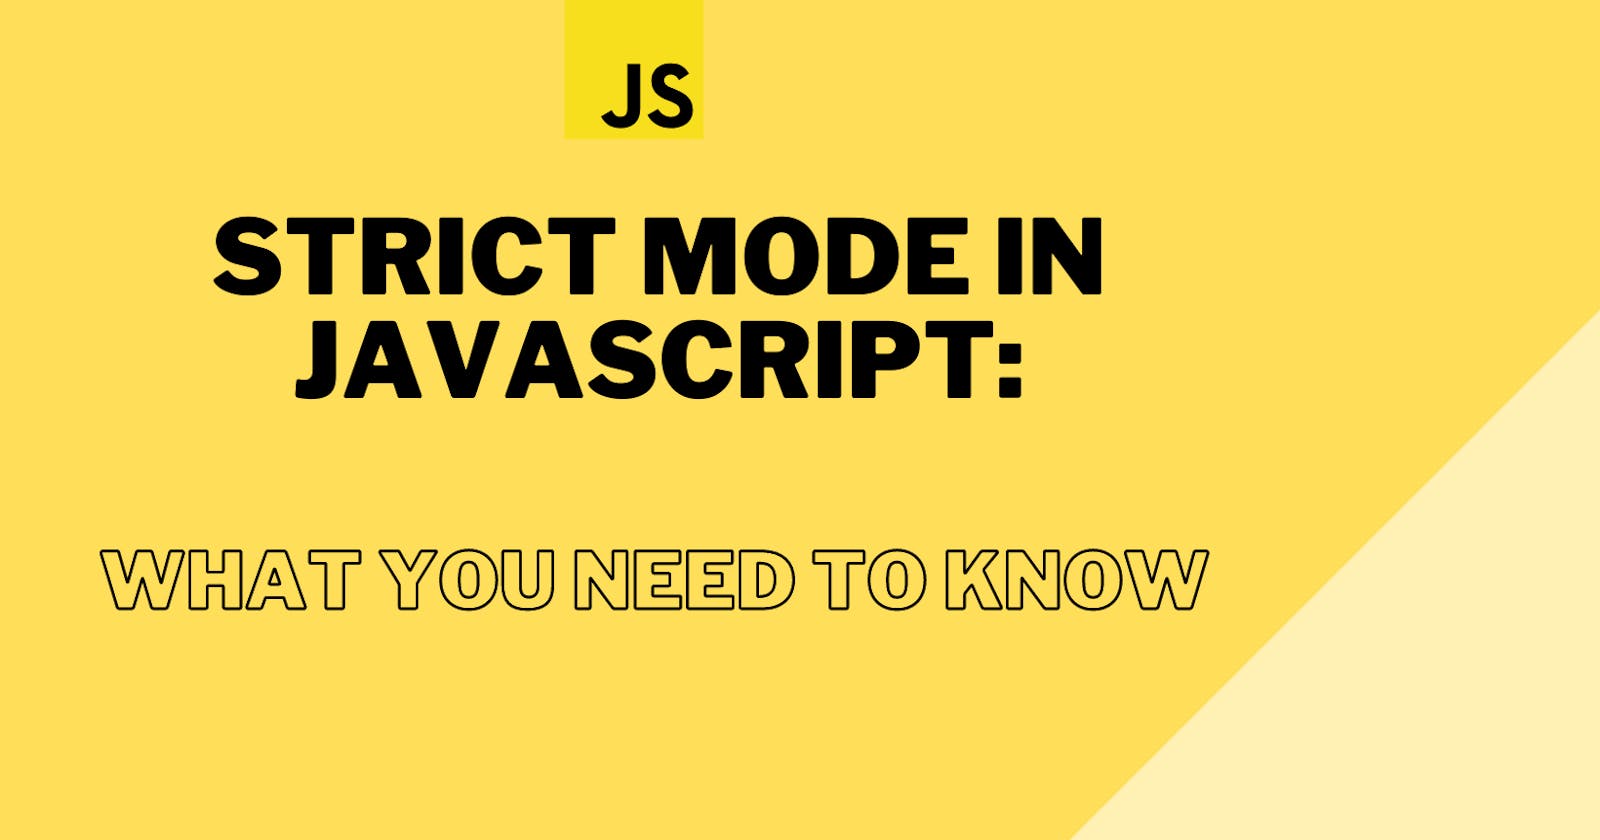 Strict mode in JavaScript: What you need to know